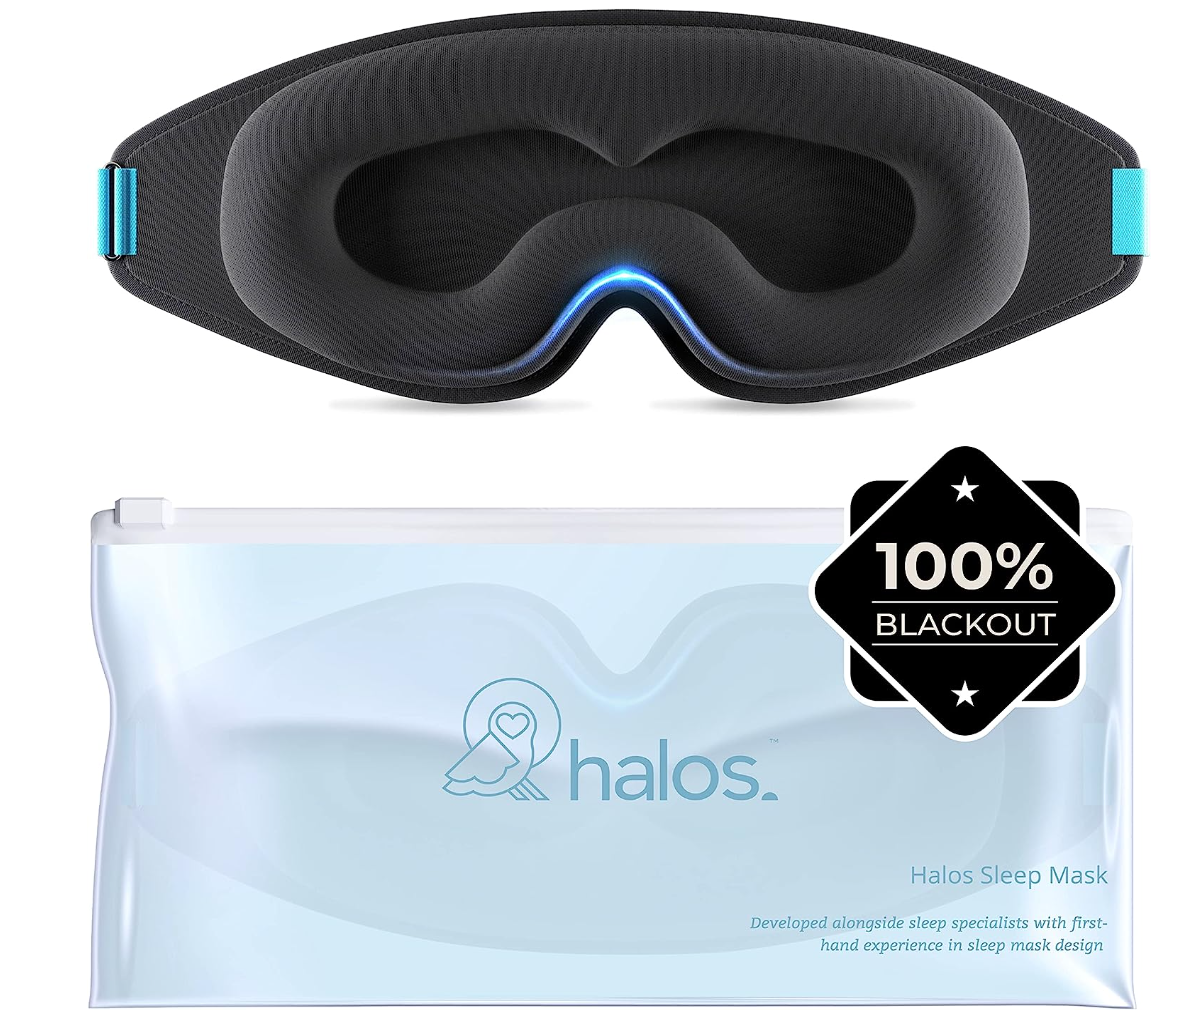 Halo 3D Sleep Mask for Women and Men- Blackout Eye Mask for Sleeping Blissfully- Our Sleep Eye Mask for Lash Extensions Provides Comfort with No Eye Pressure  (Copy)